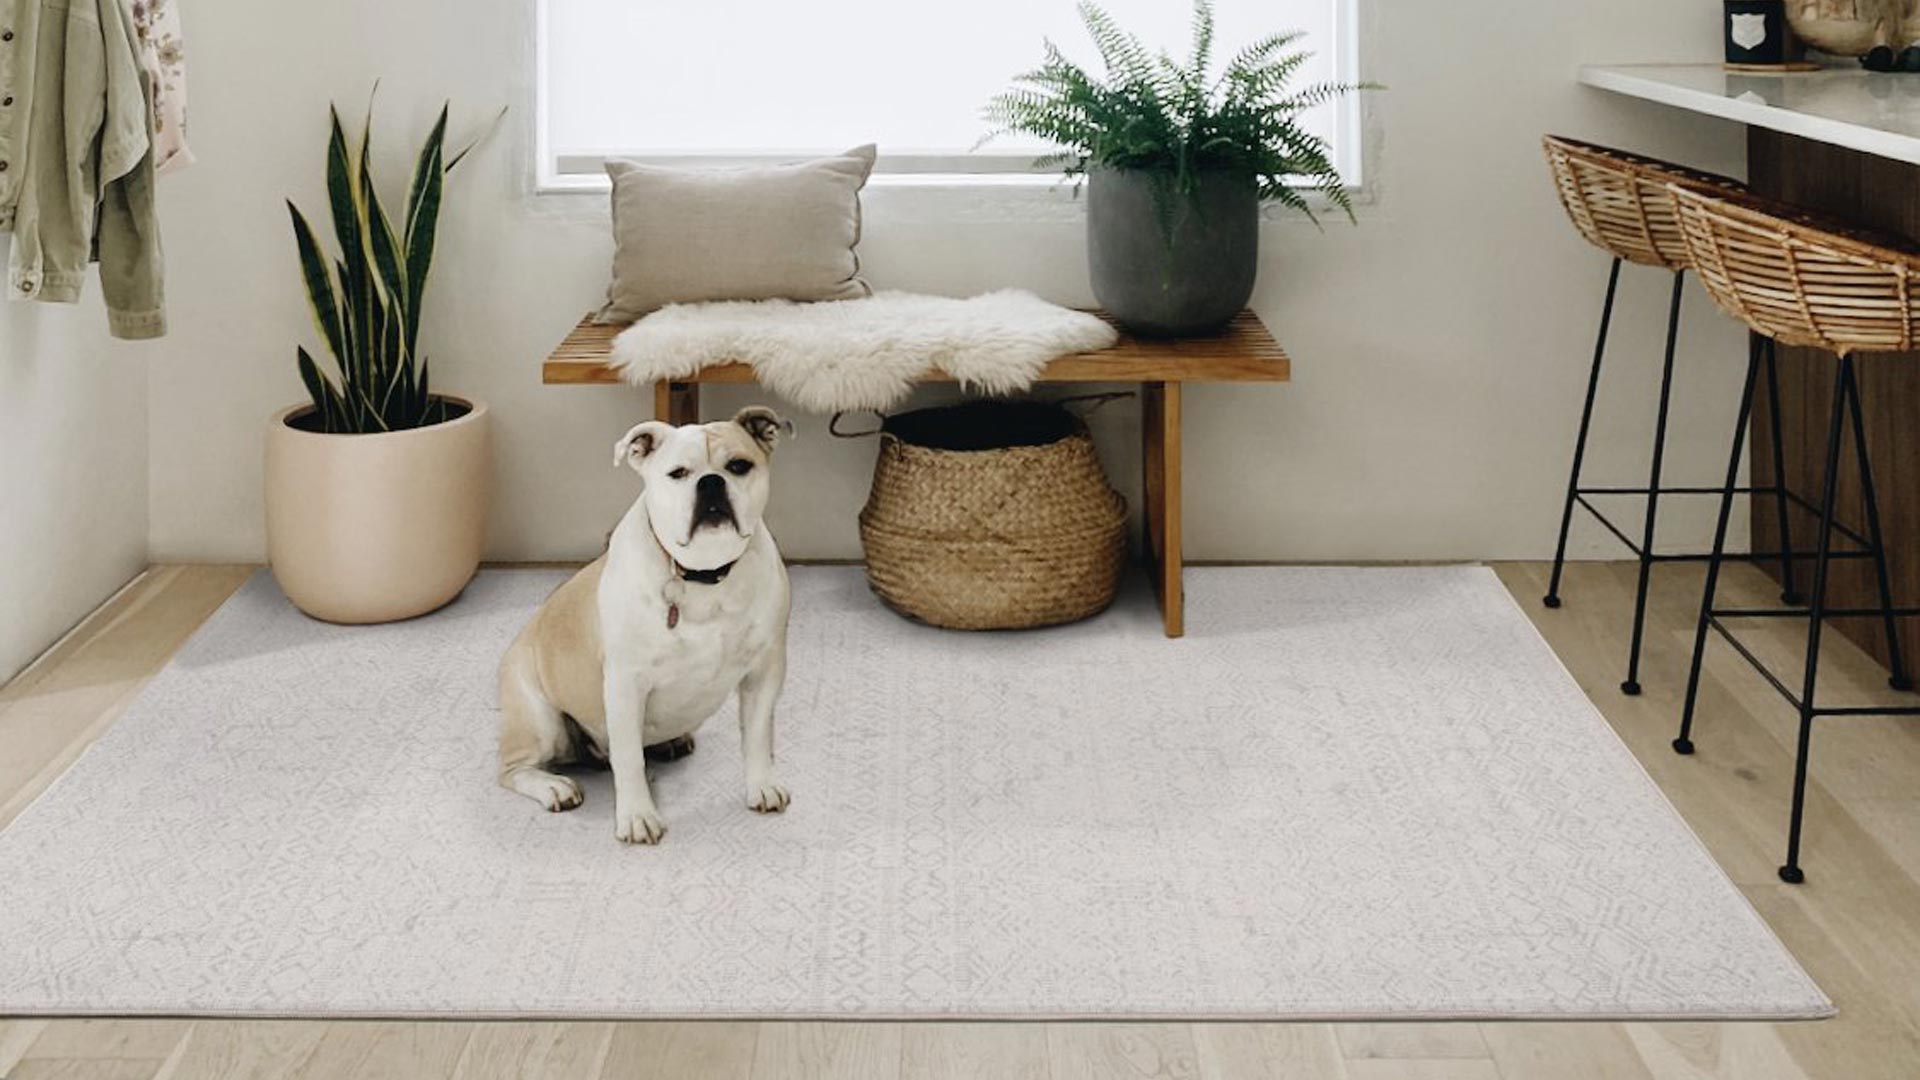 Muddy paws are no match for our washable and spillproof rugs! 📸  @prouddogmomblog Rug: Tabor — Natural/Ash #washablerug #homeinterior…